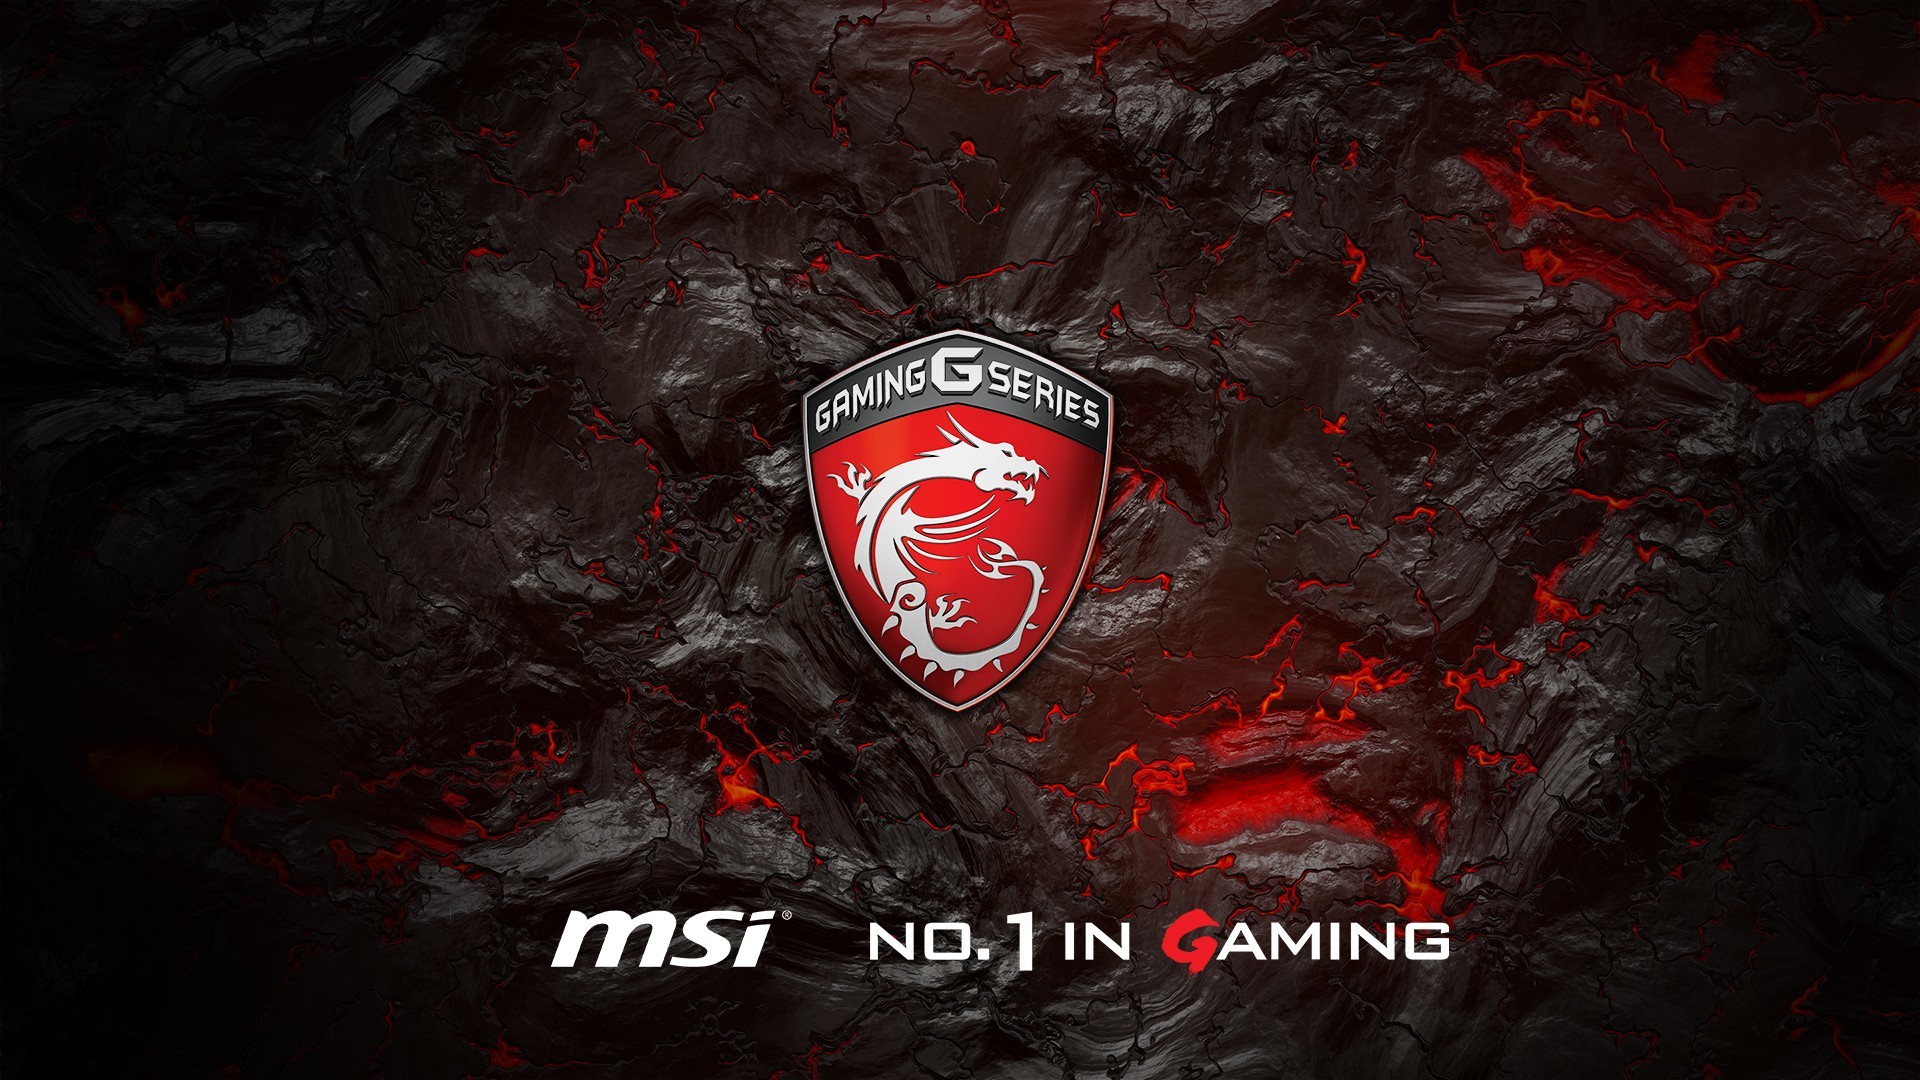 MSI, Gambit Gaming, Red, Dragon, Lava, Numbers Wallpaper HD / Desktop and Mobile Background